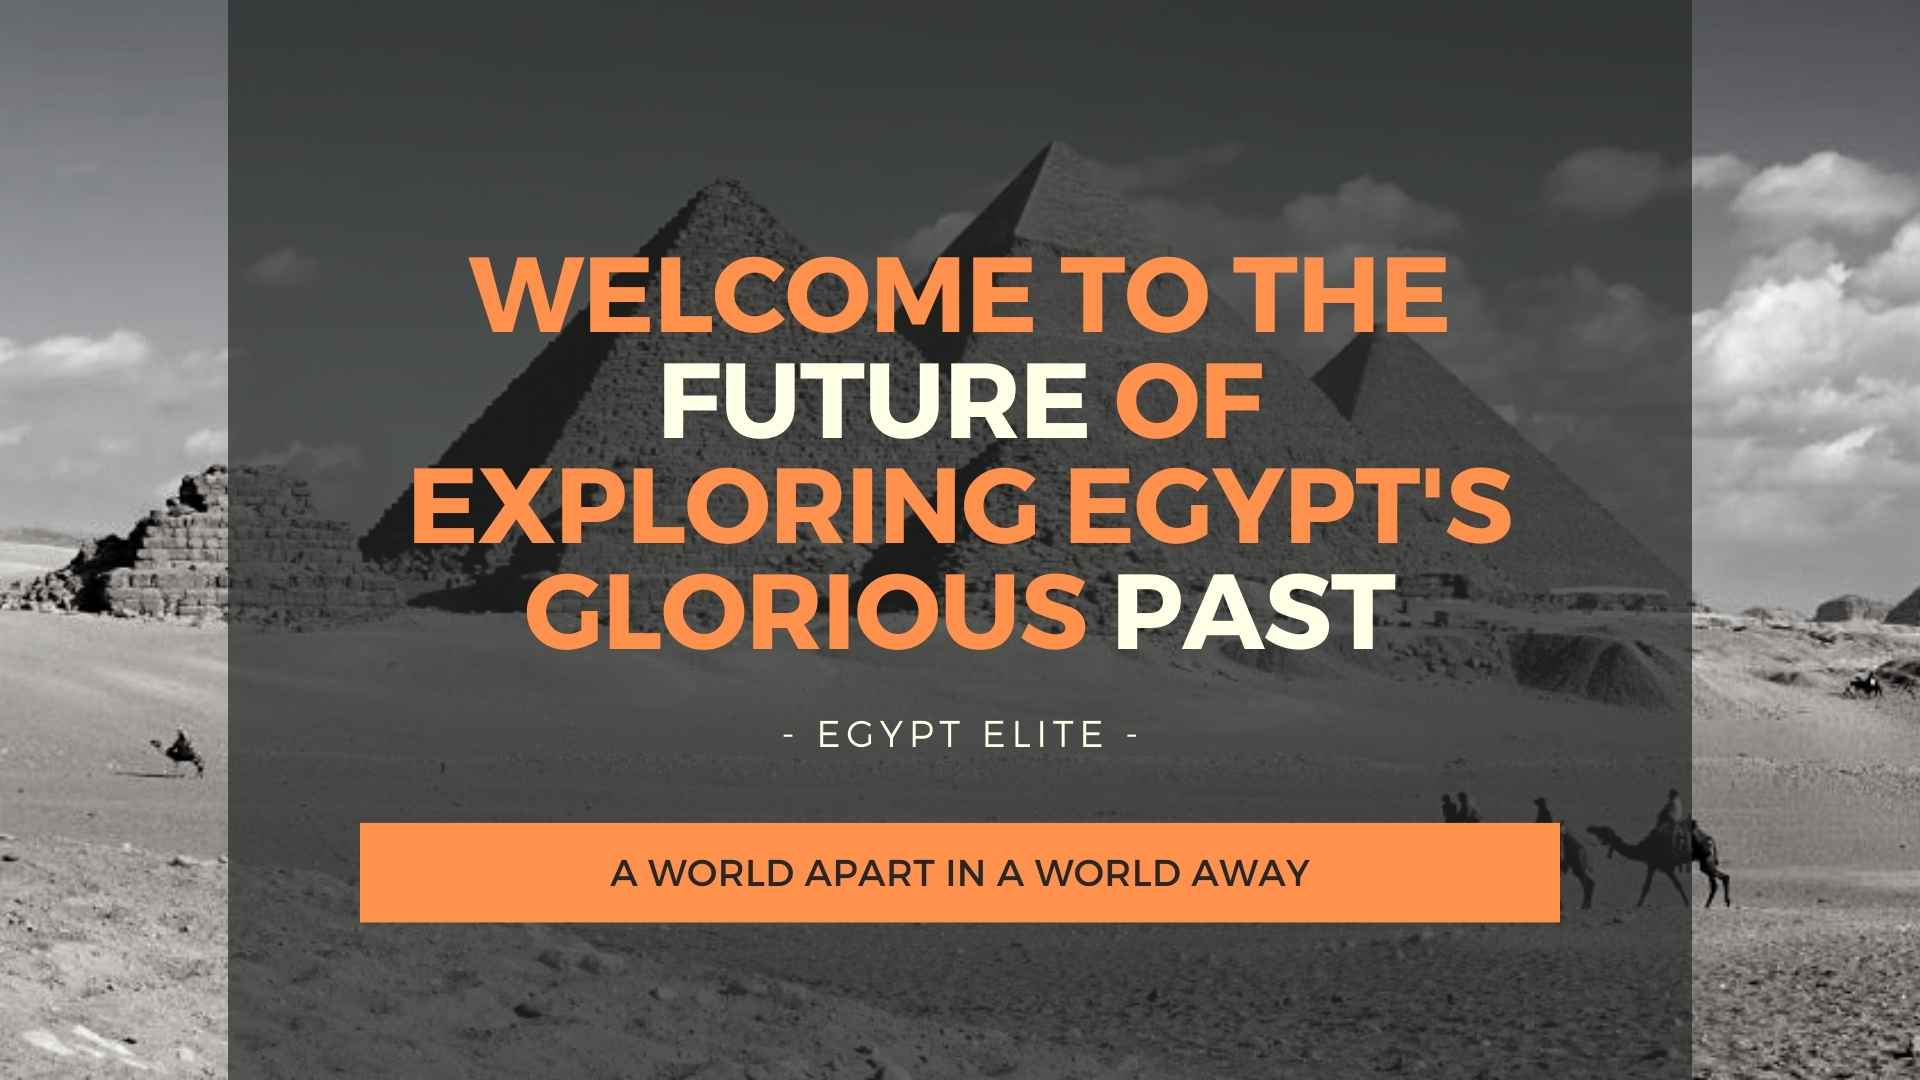 How to Structure an Itinerary in Egypt - Itinerary Cover